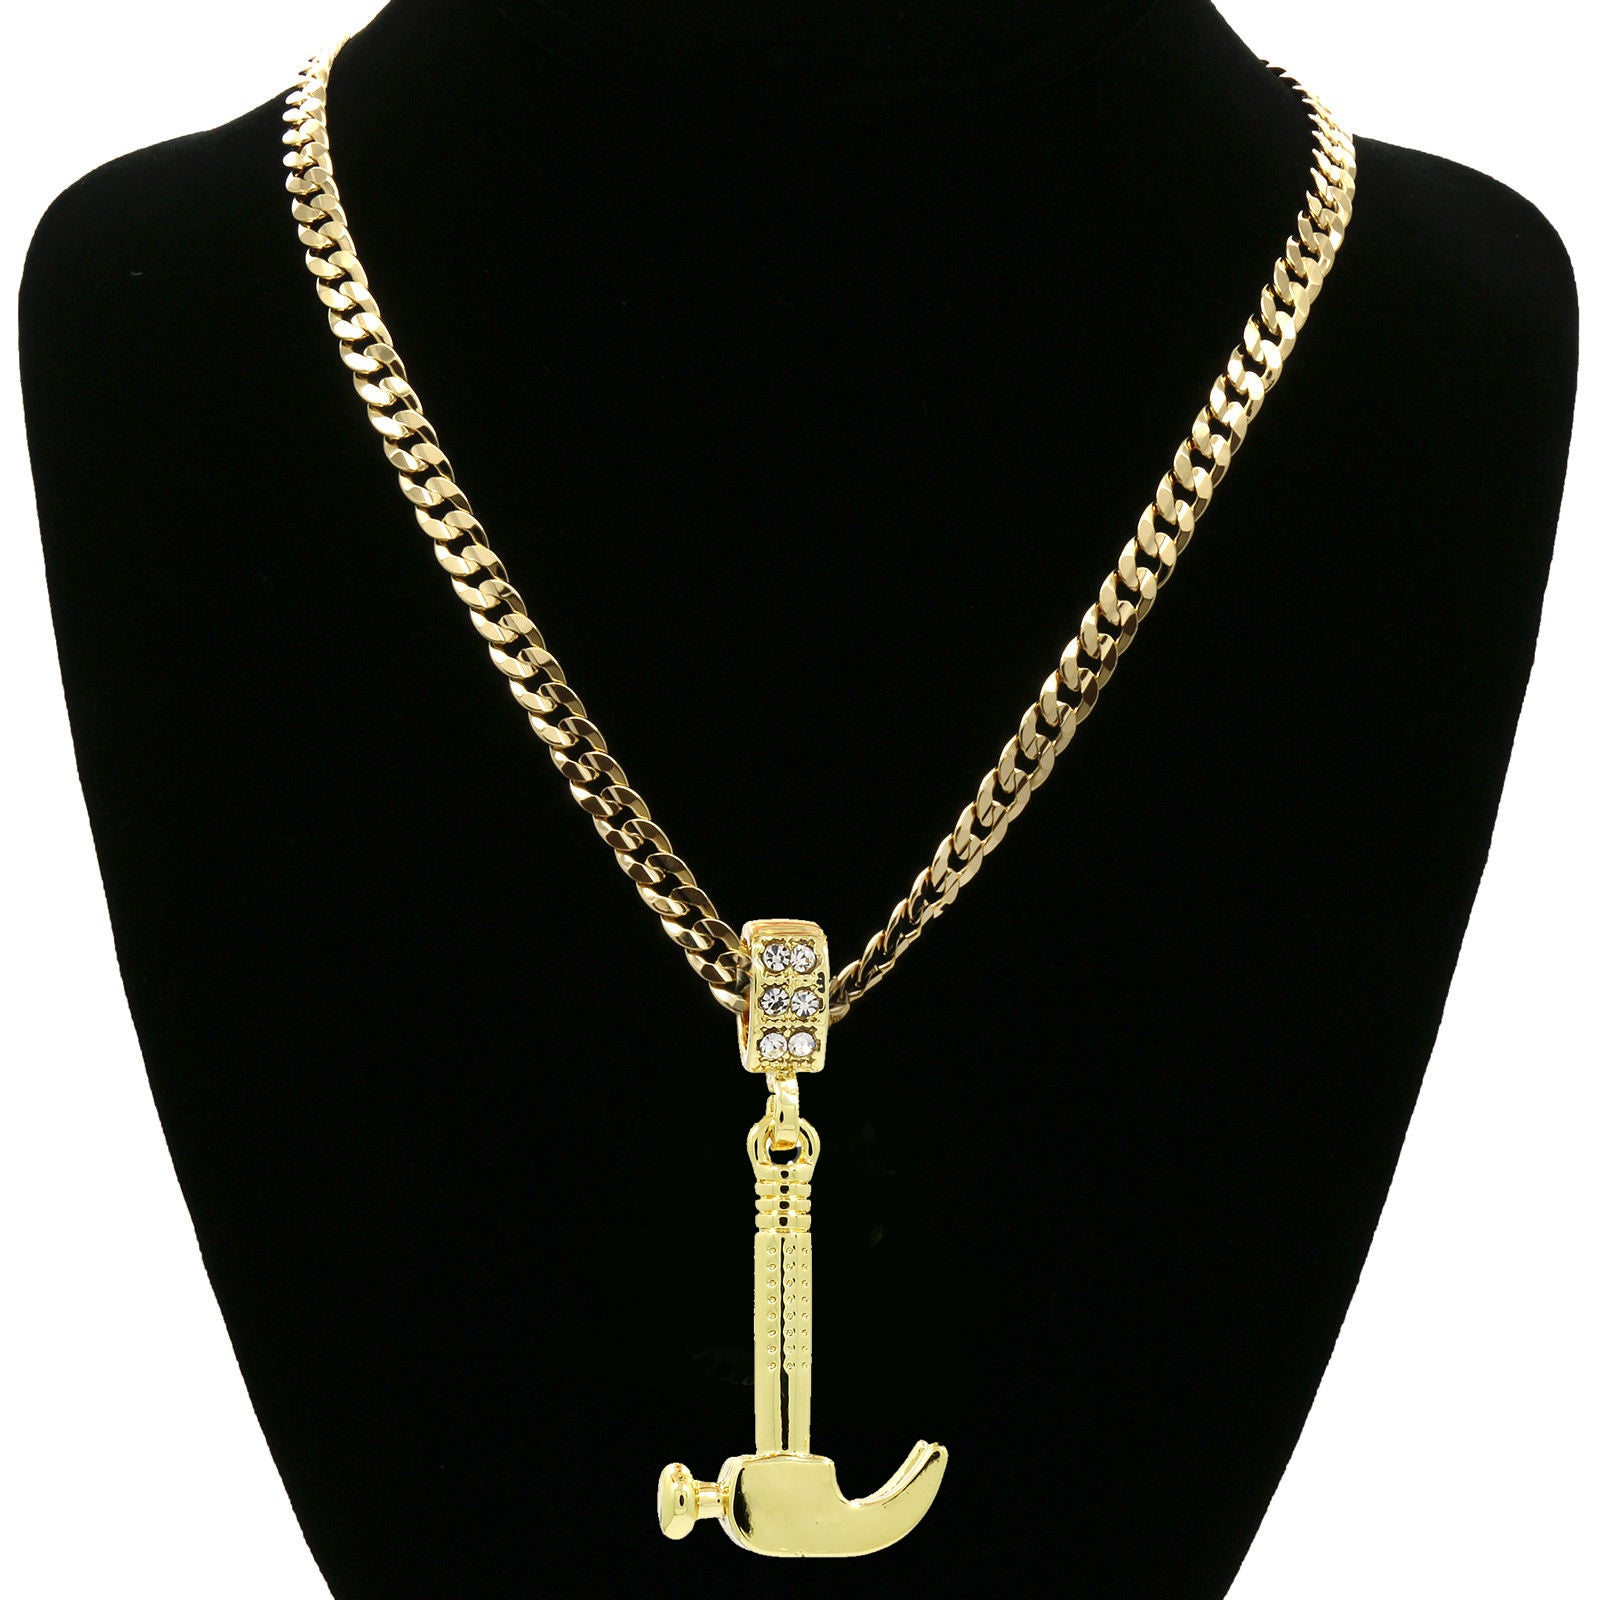 The Hammer Necklace